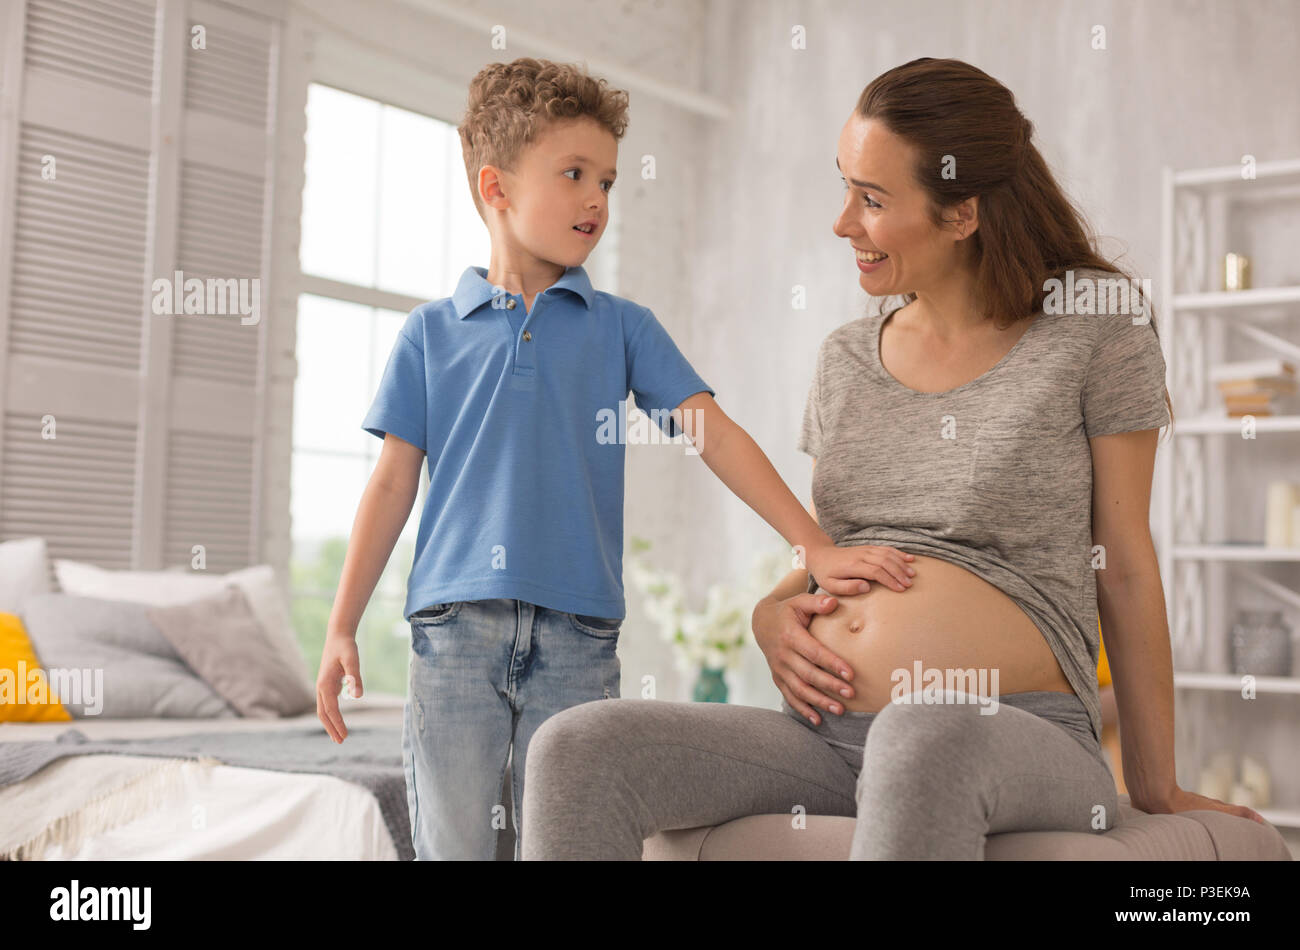 Appealing happy woman smiling broadly spending time with son Stock Photo